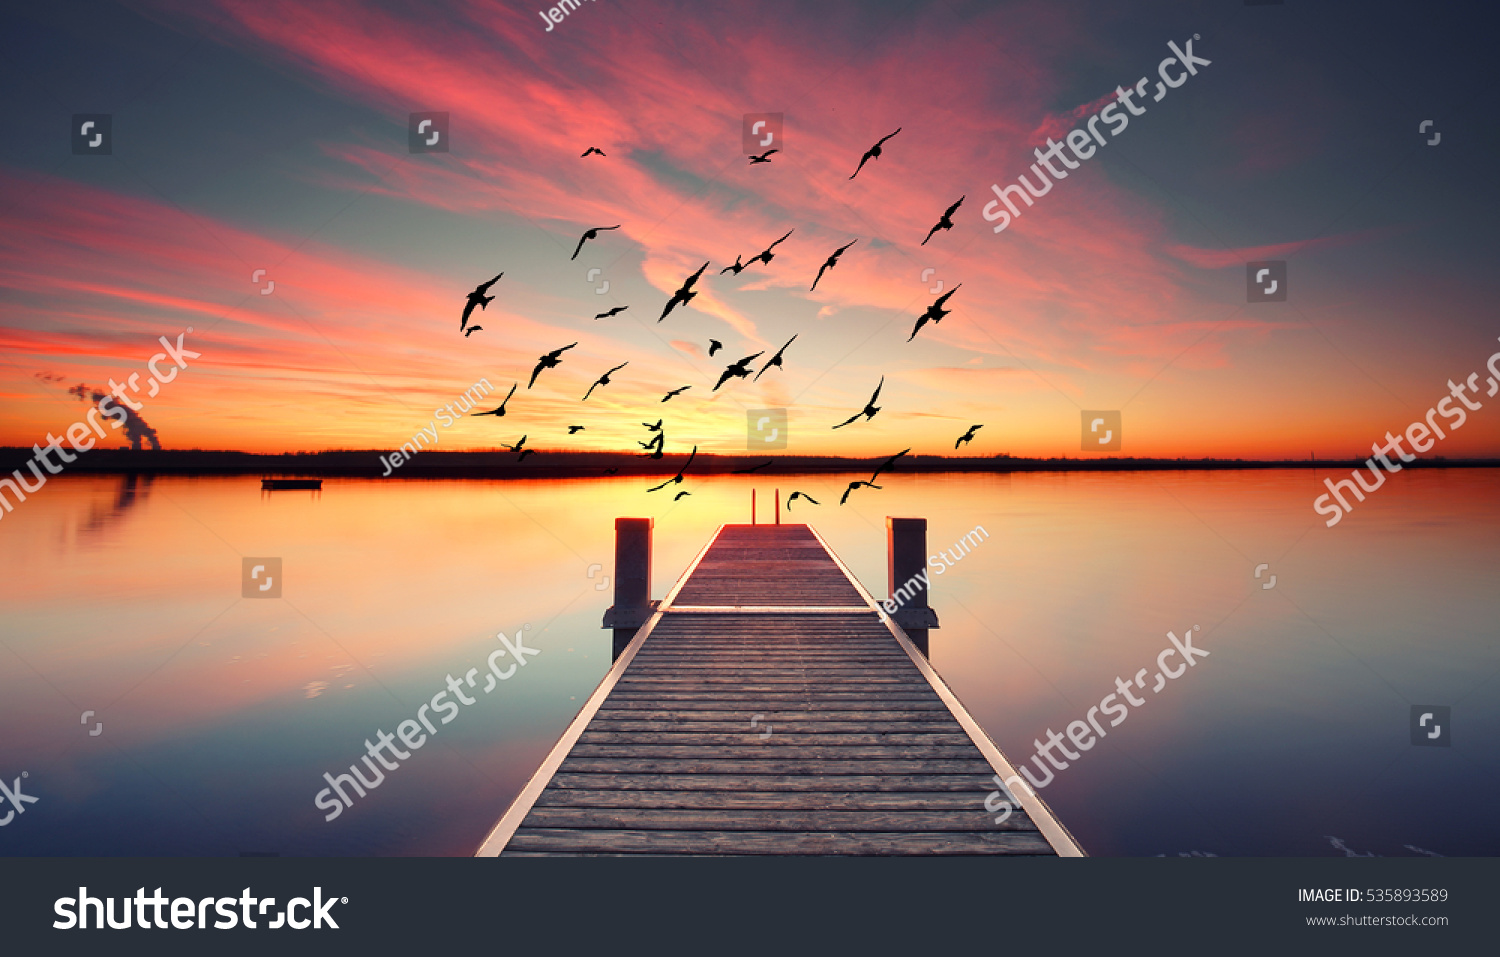 Perspective view of a wooden pier on the pond at sunset with perfectly specular reflection #535893589